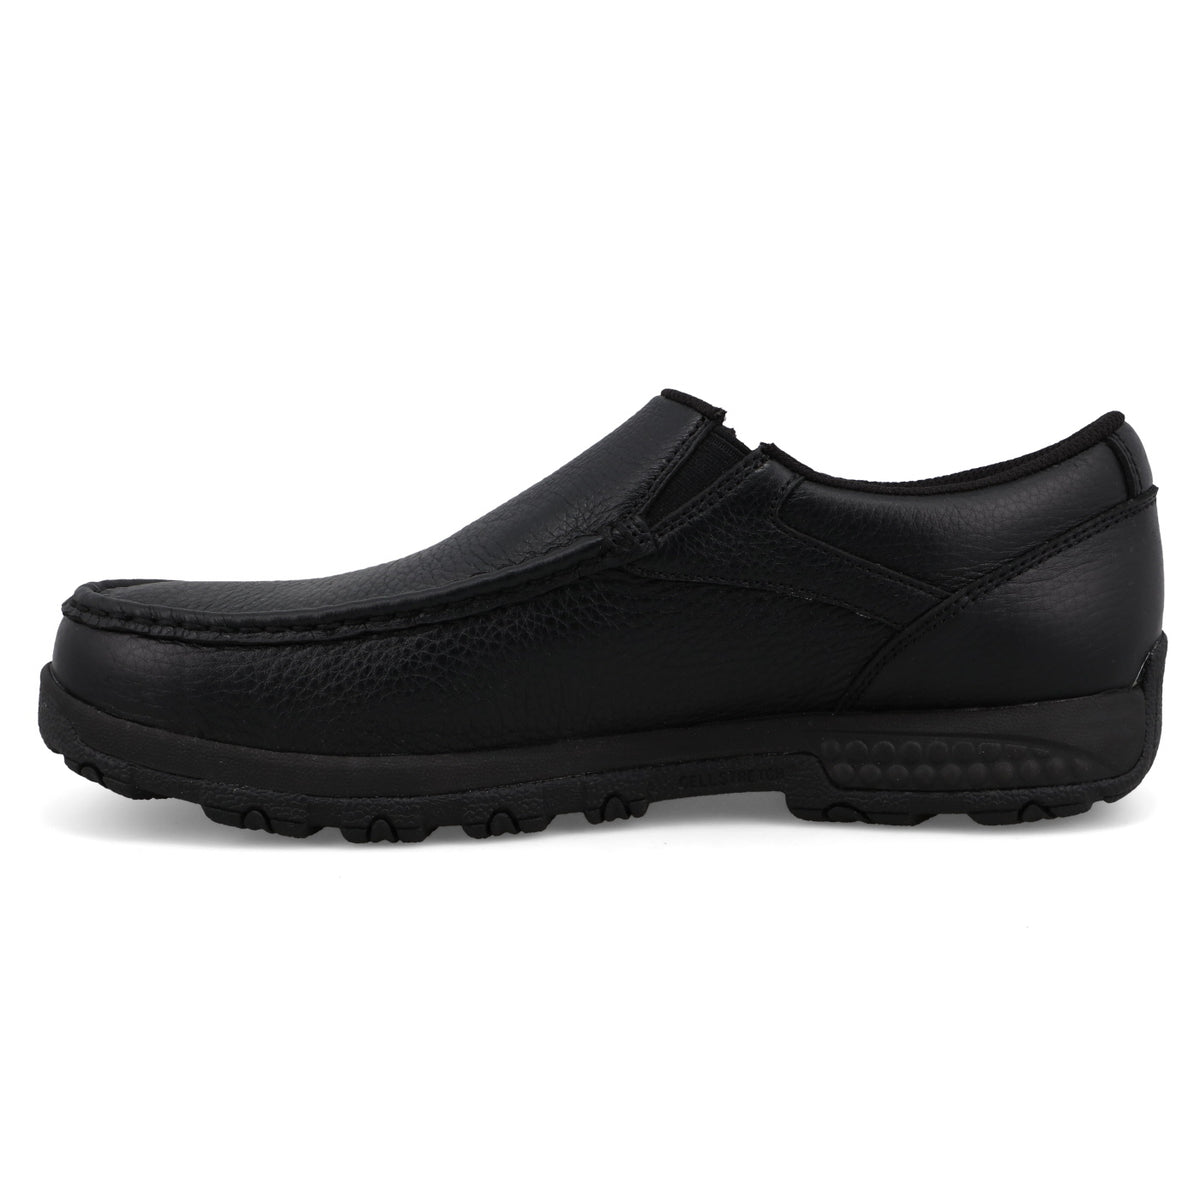 Twisted X Men's Slip-On Driving Moc in Antique Black